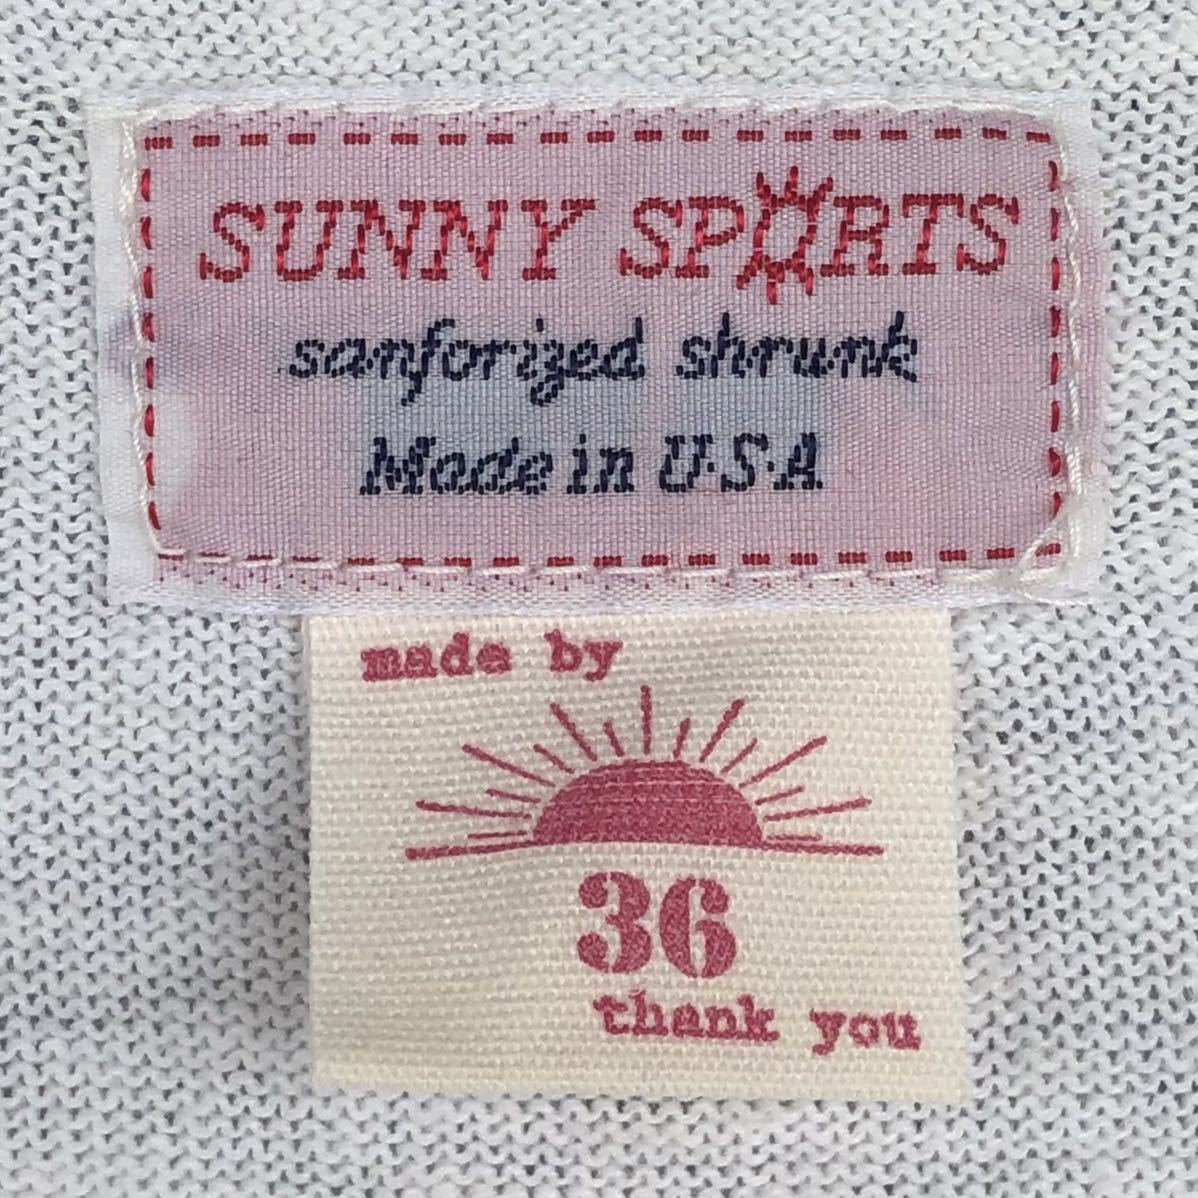 made in USA★SUNNY SPORTS / 半袖プリント Tシャツ S★CALIF MALIBU SURFIN' ROUTE/サニースポーツ コットン カットソー/アメリカ製の画像4